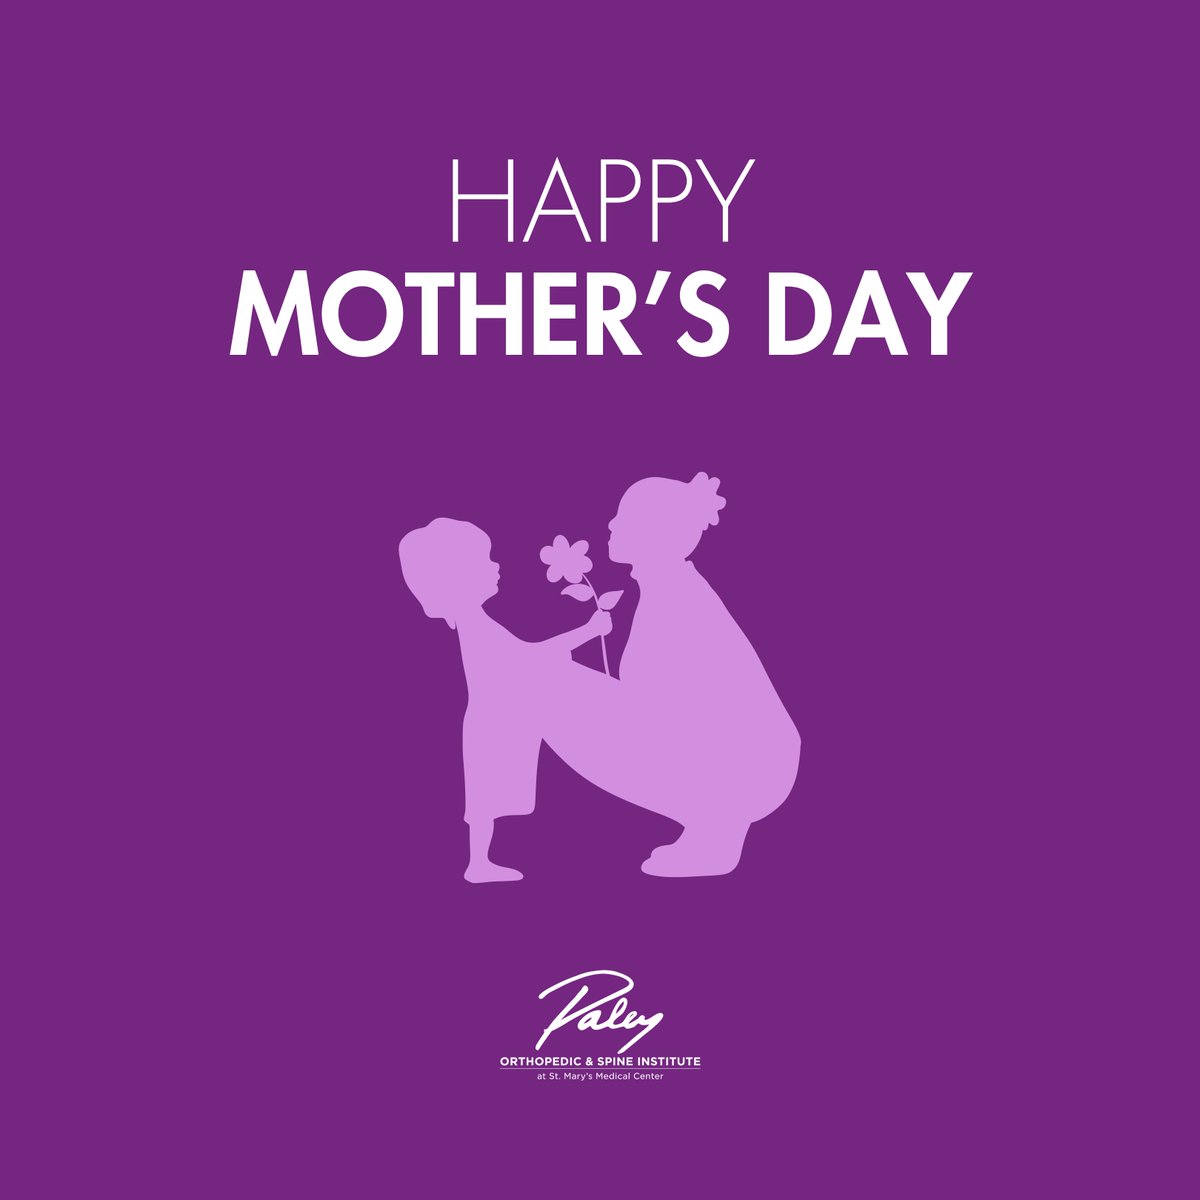 Happy Mother's Day! Today, we celebrate the epitome of strength, love, and resilience embodied by mothers everywhere. Your unwavering support fuels our journey, and we're grateful for the profound impact you make. Here's to you today and every day.💜💐 #MothersDay #PaleyCare